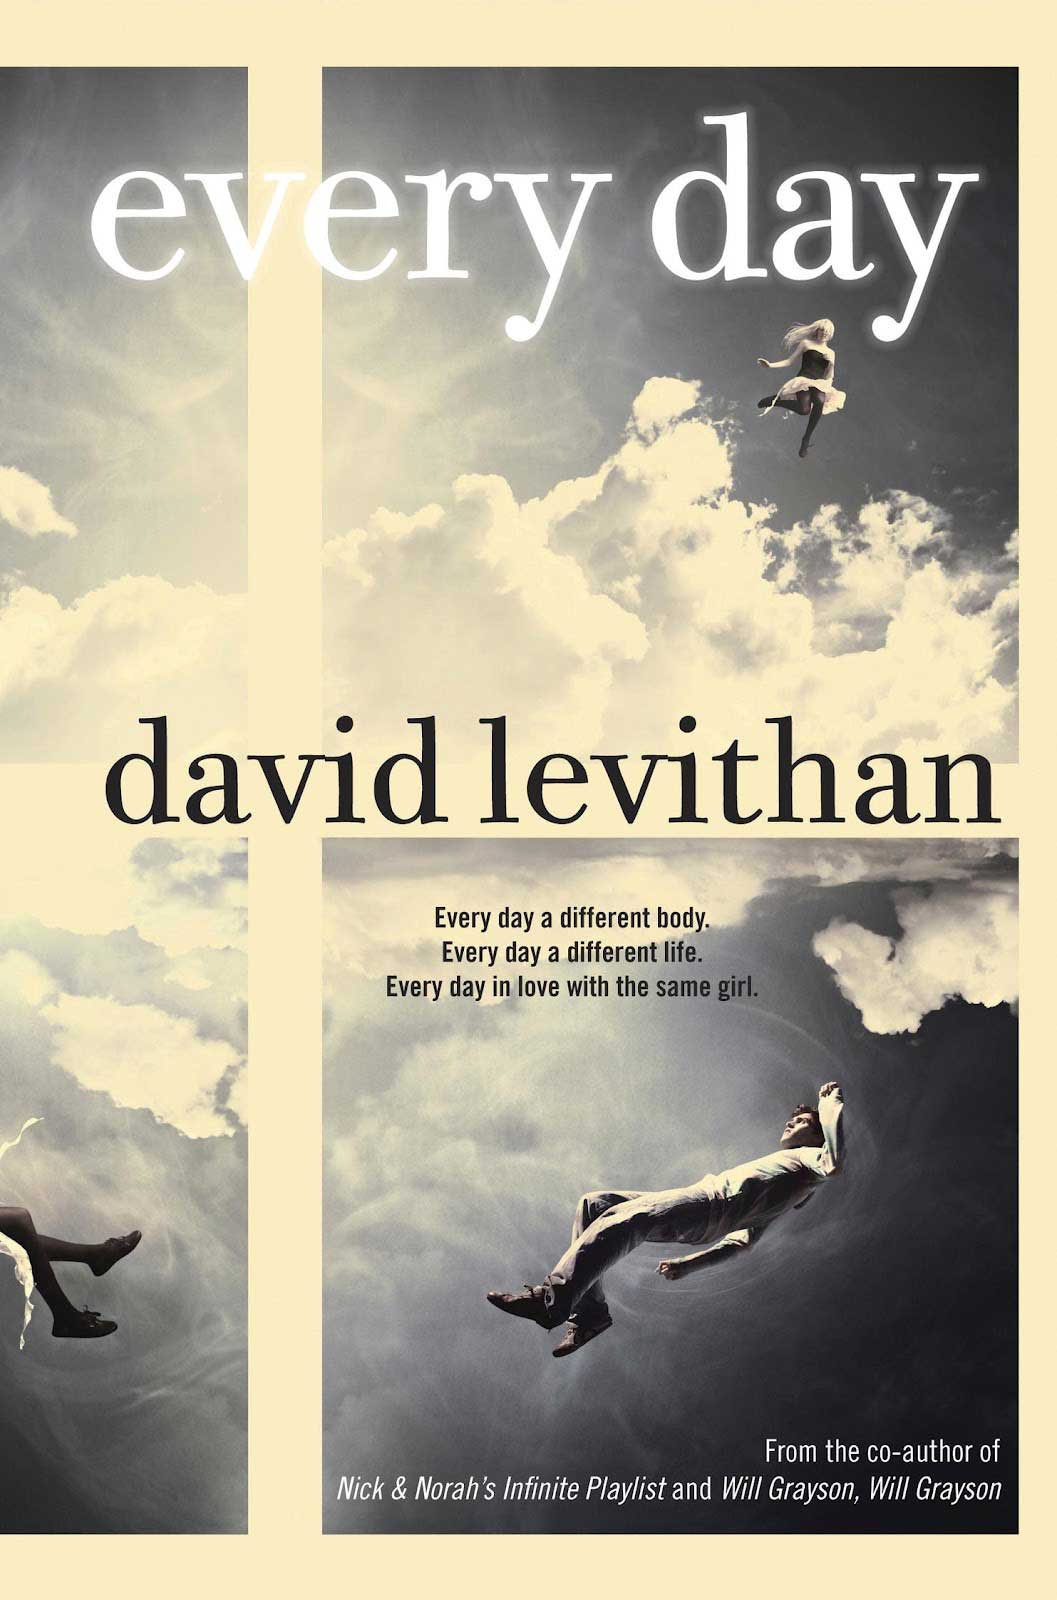 Every Day, by David Levithan.
                              
                              
                              
                              A teenager called A wakes up every morning in a new 16-year-old’s body, a fact he adjusts to until he falls in love with Rhiannon and grapples with trying to stay with her.
                              
                              
                              
                              Buy now: Every Day